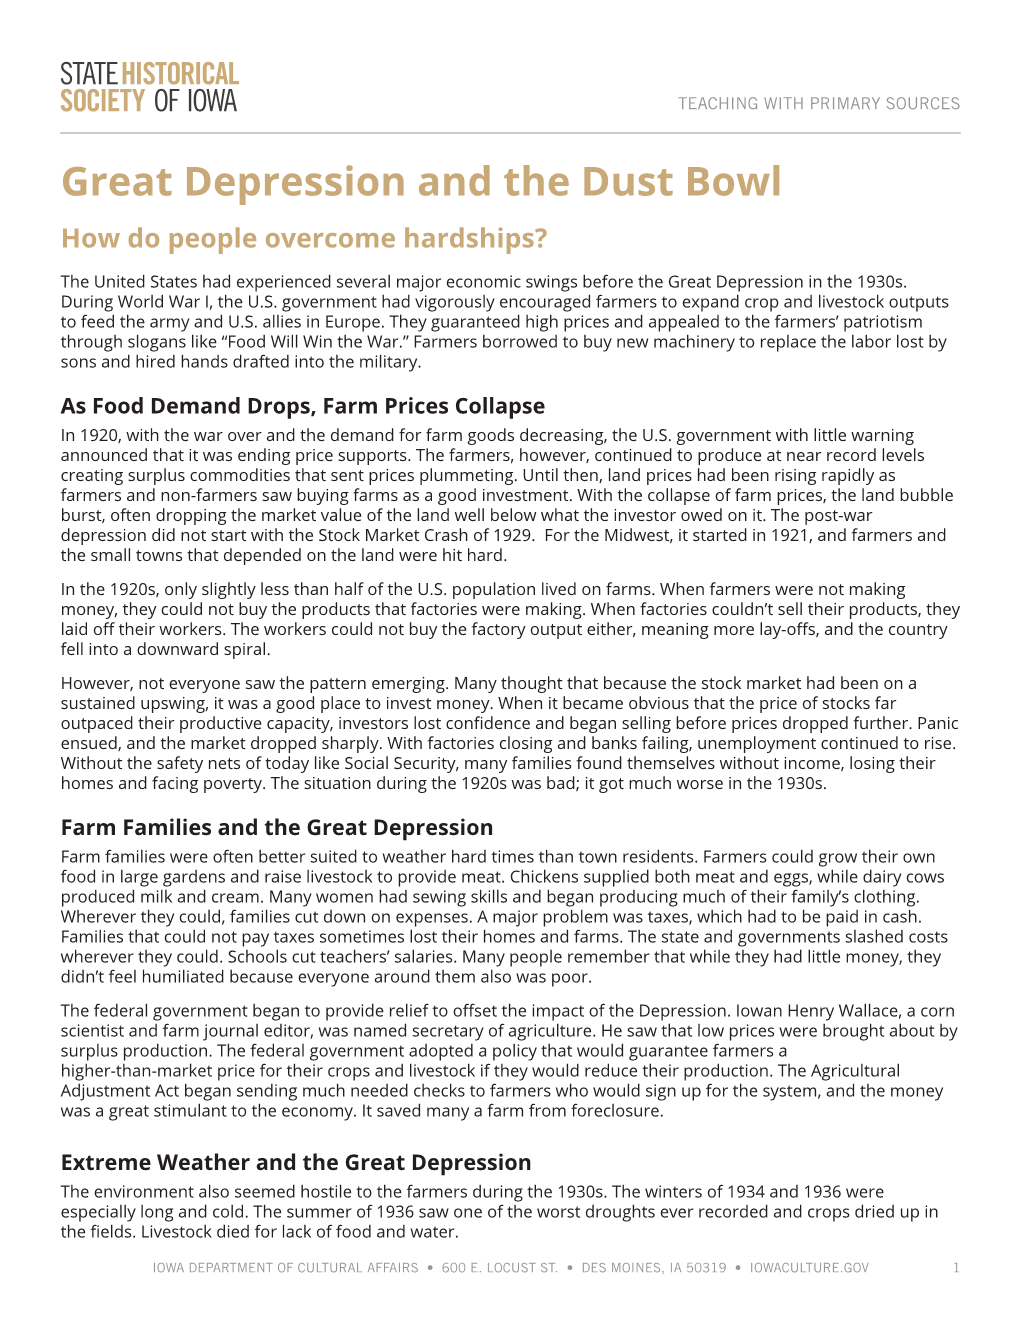 Great Depression and the Dust Bowl How Do People Overcome Hardships?